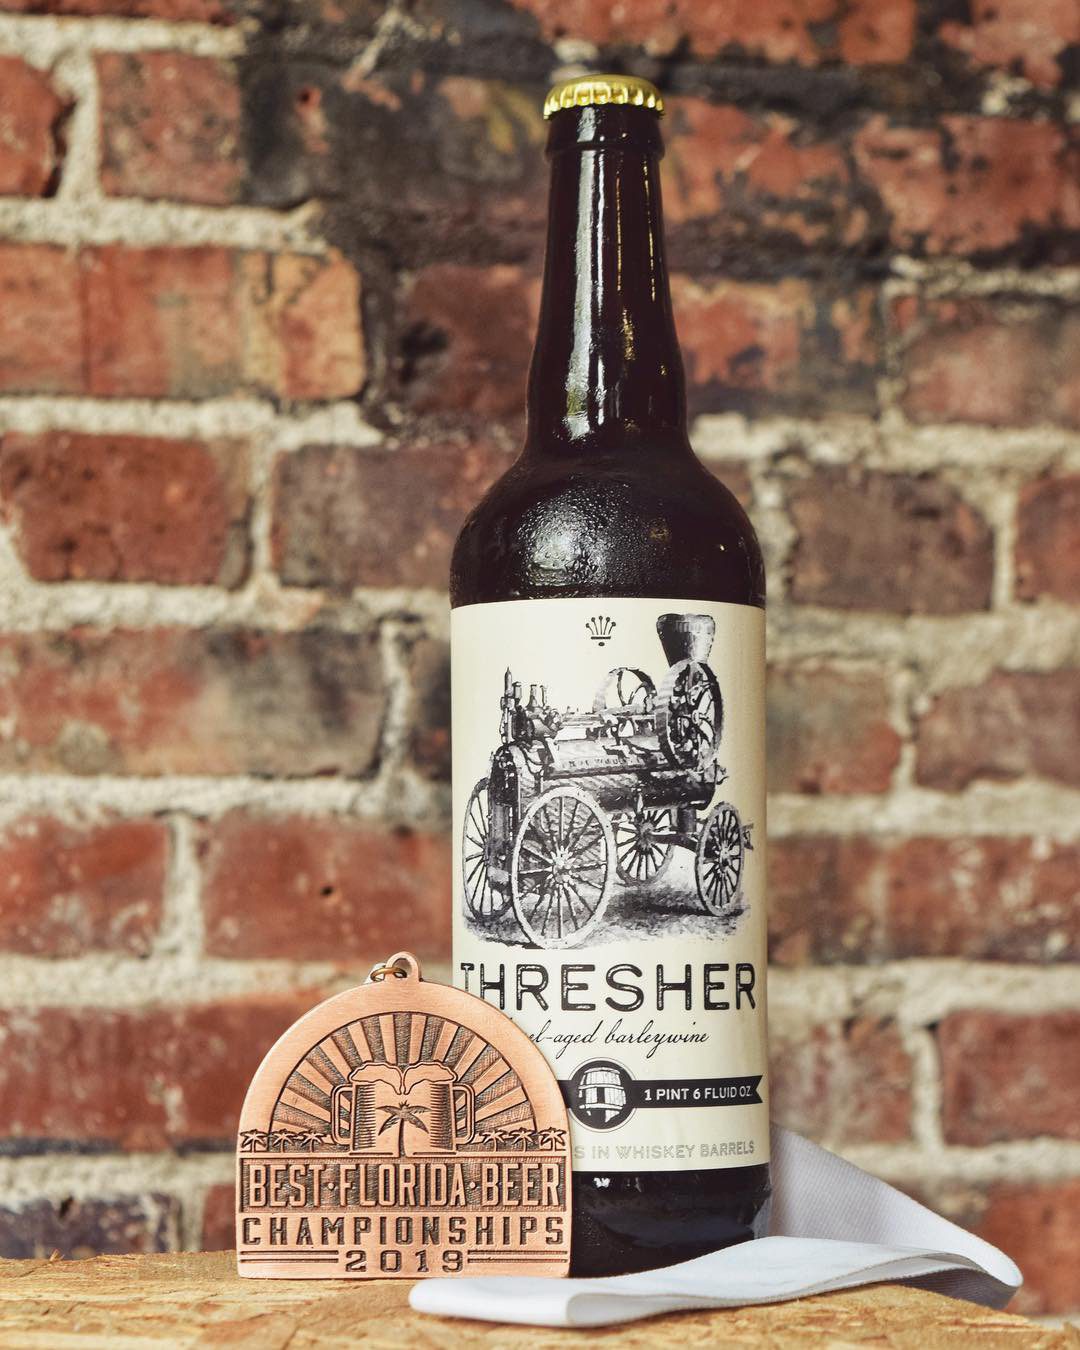 Thresher English-Style Barleywine in bottle in brewhouse in front of brick wall